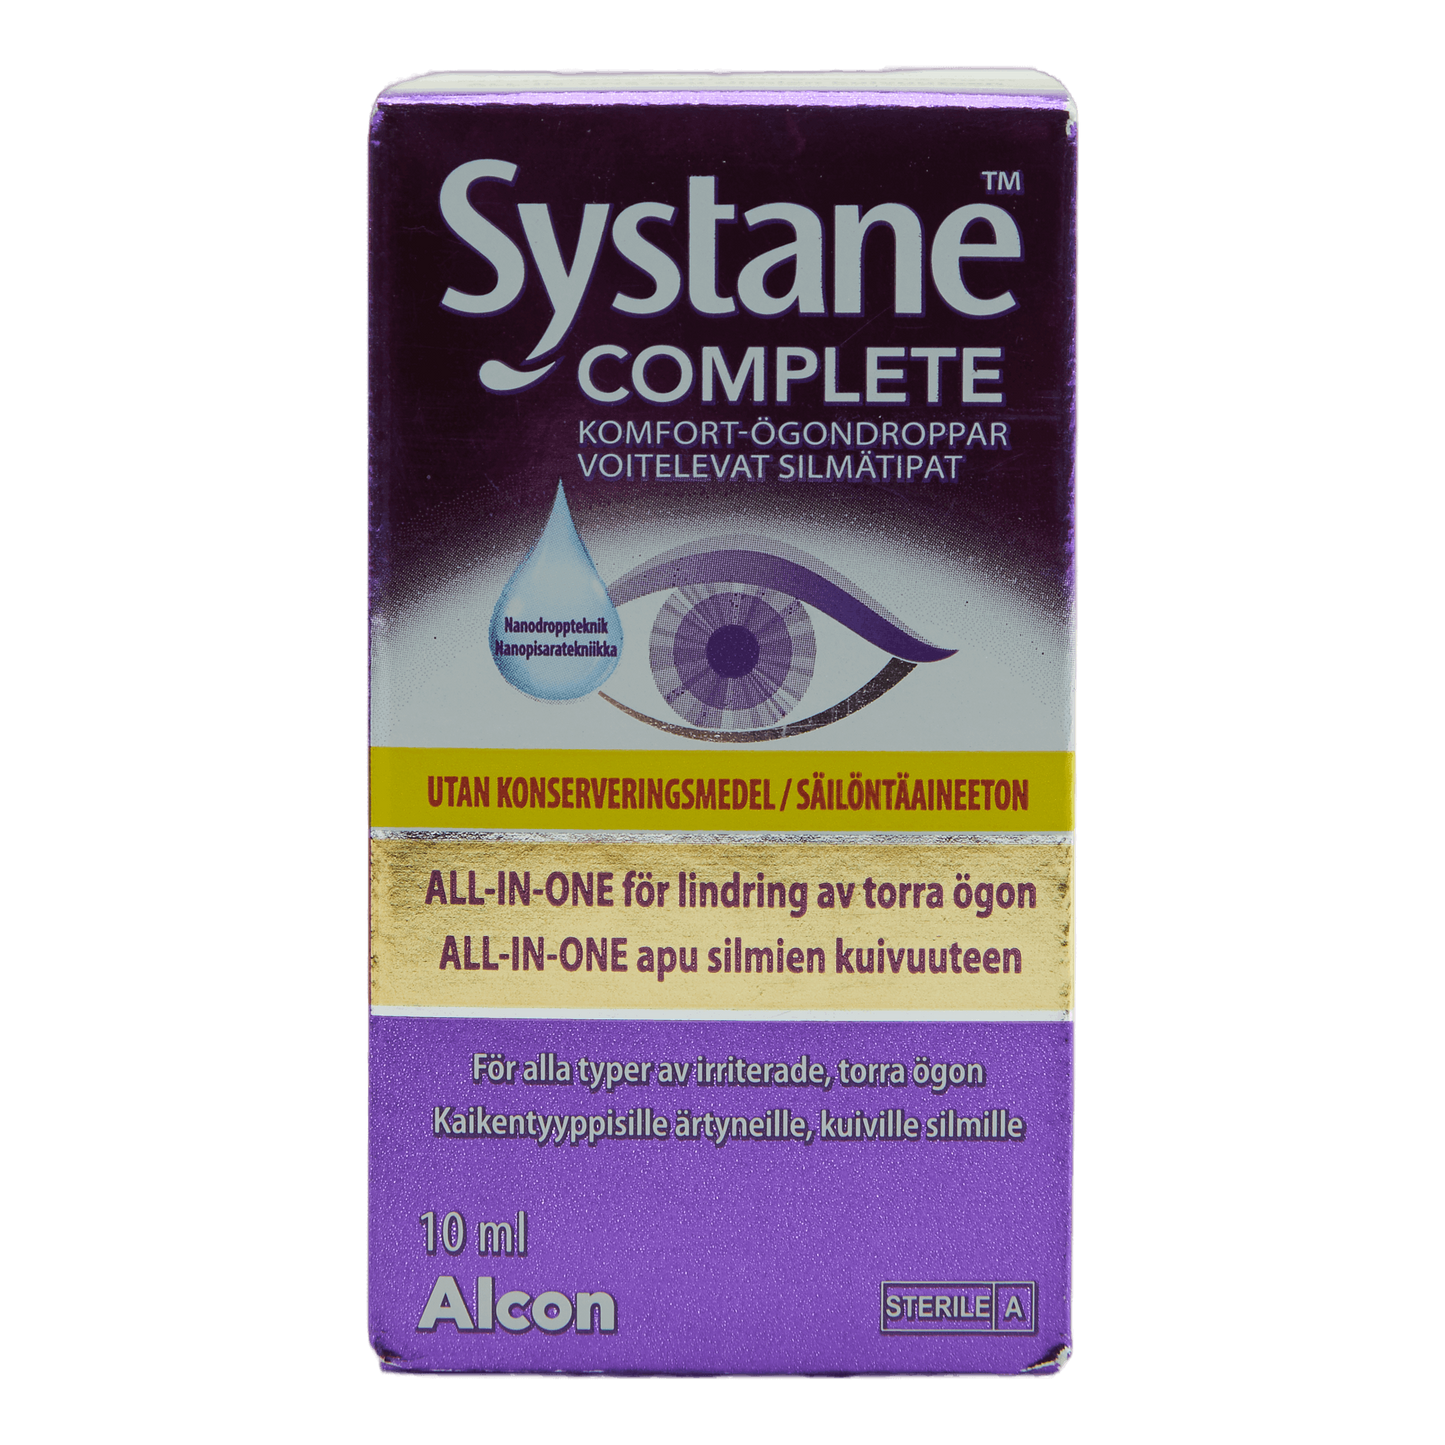 Systane Complete Preservative-Free